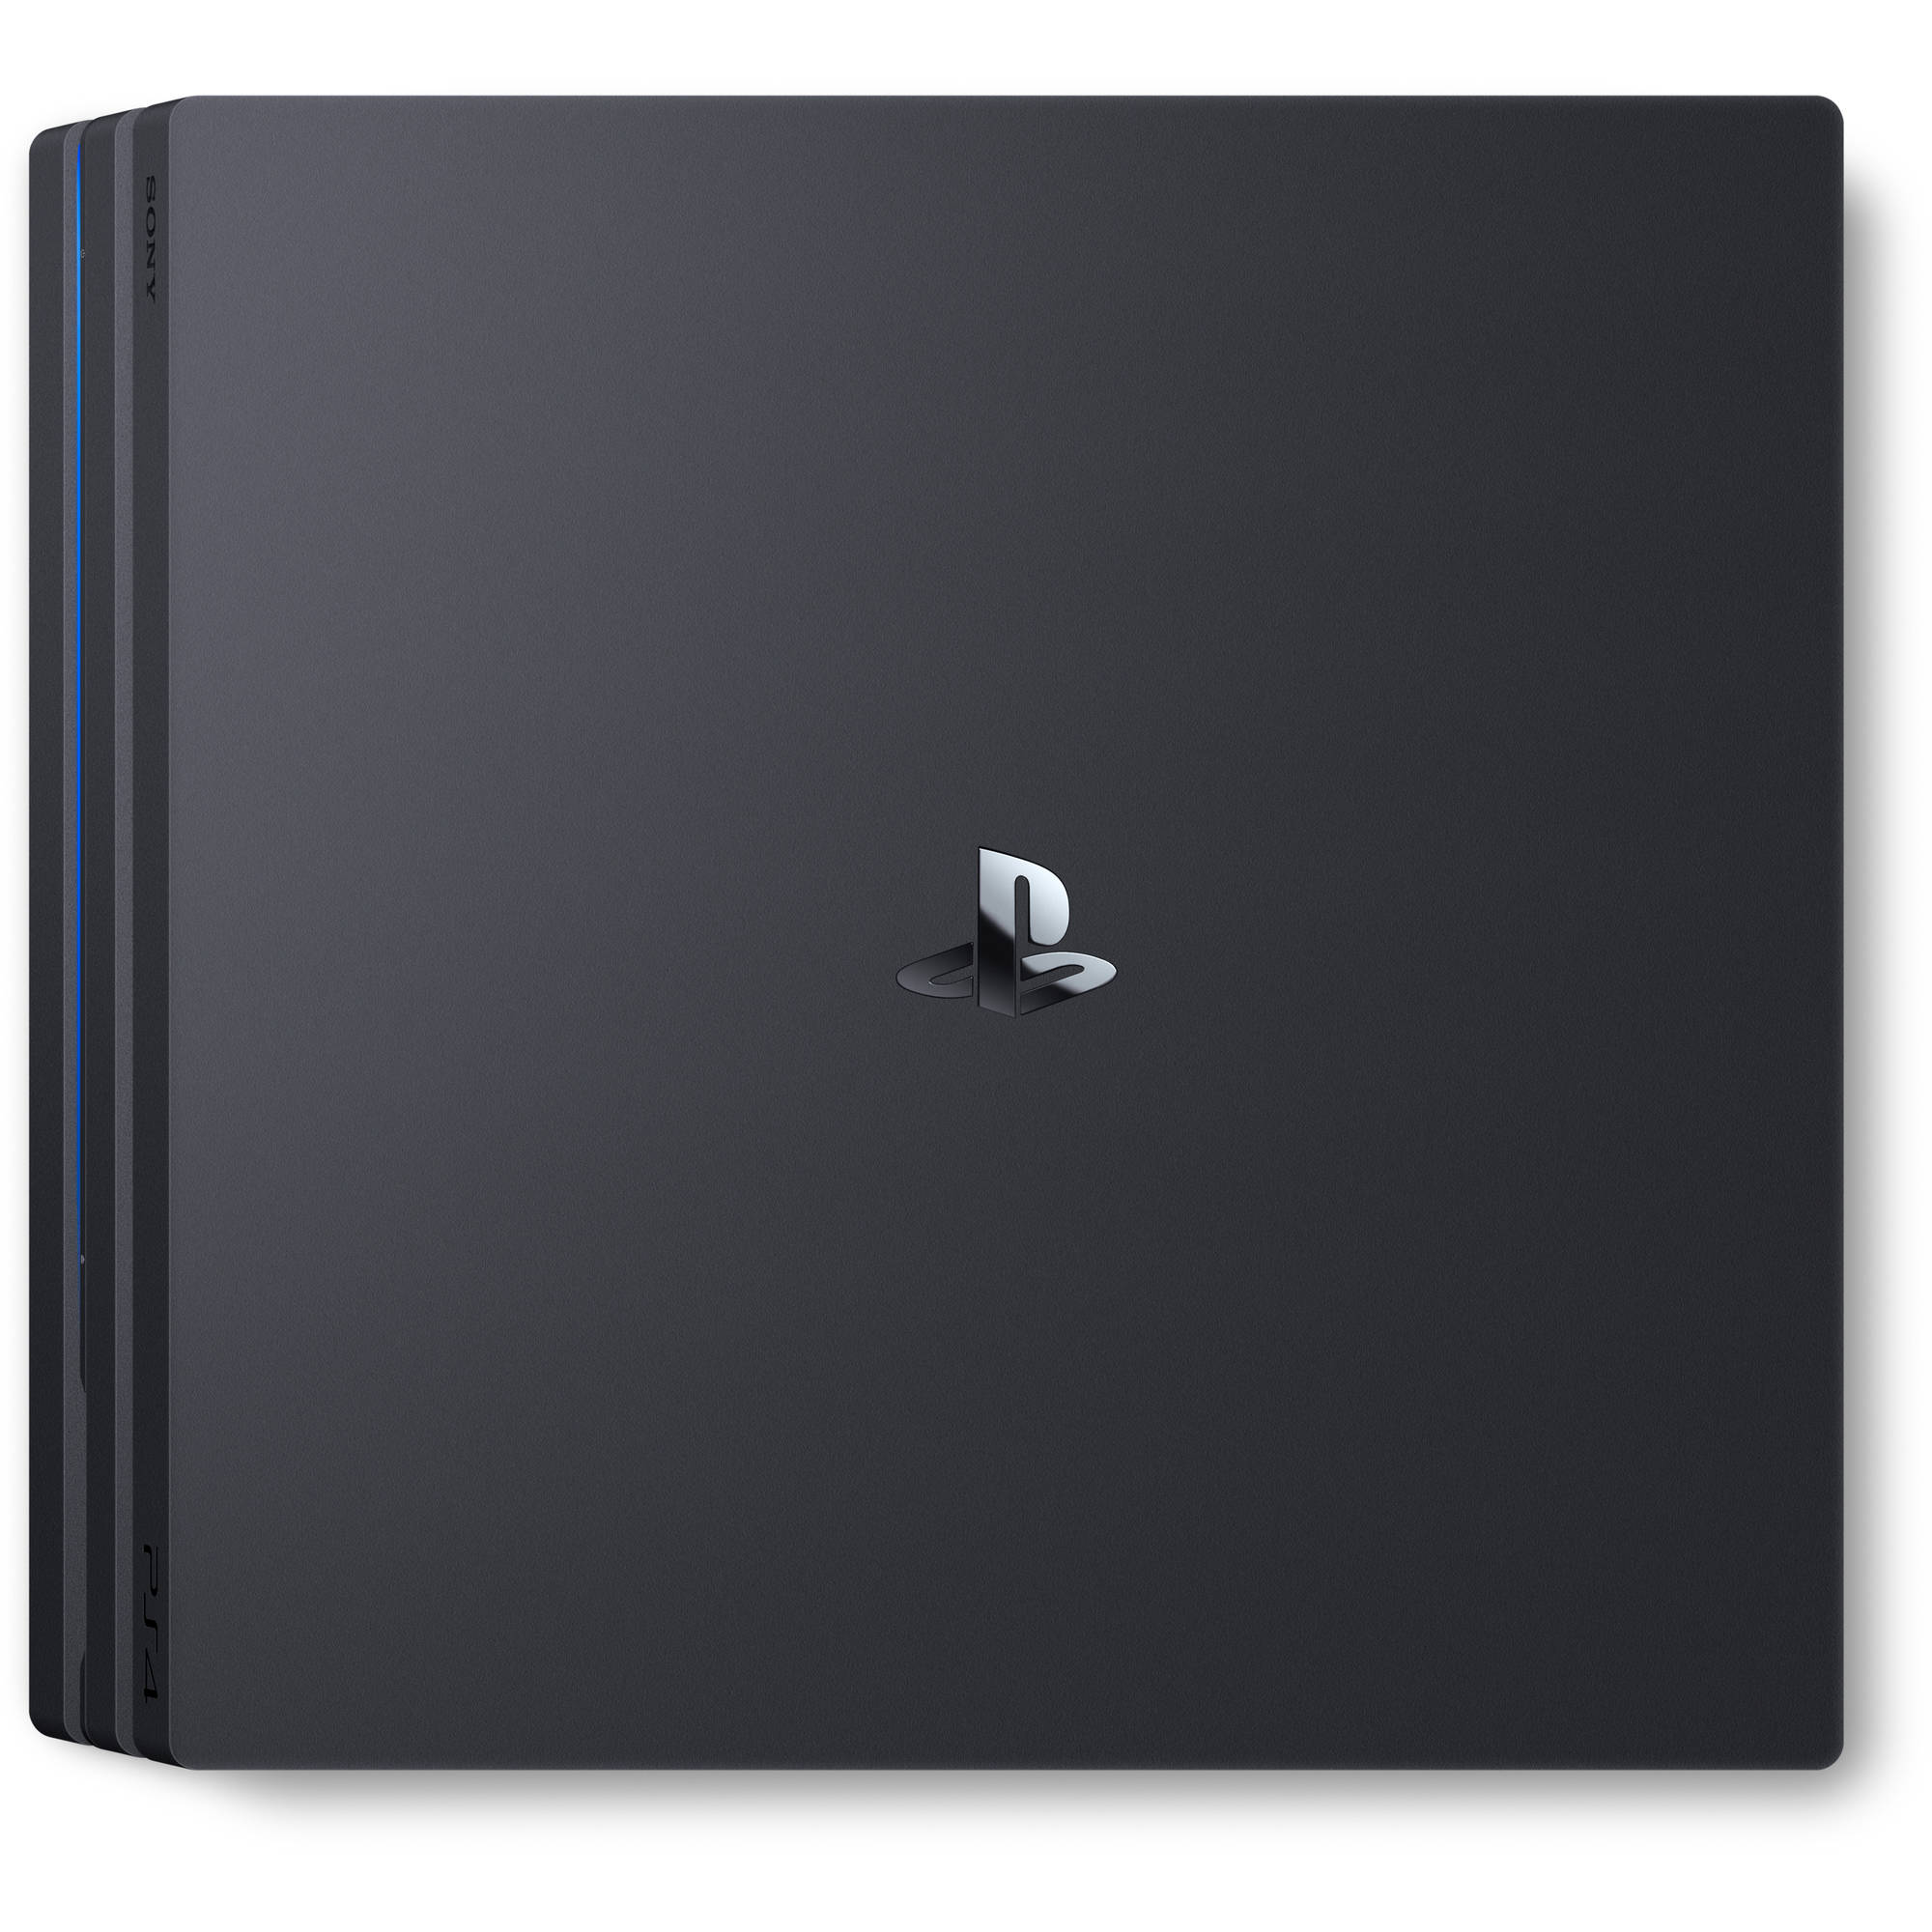 Restored Sony PlayStation 4 Pro 1TB Console, Black, RB3001510 (Refurbished) - image 3 of 5